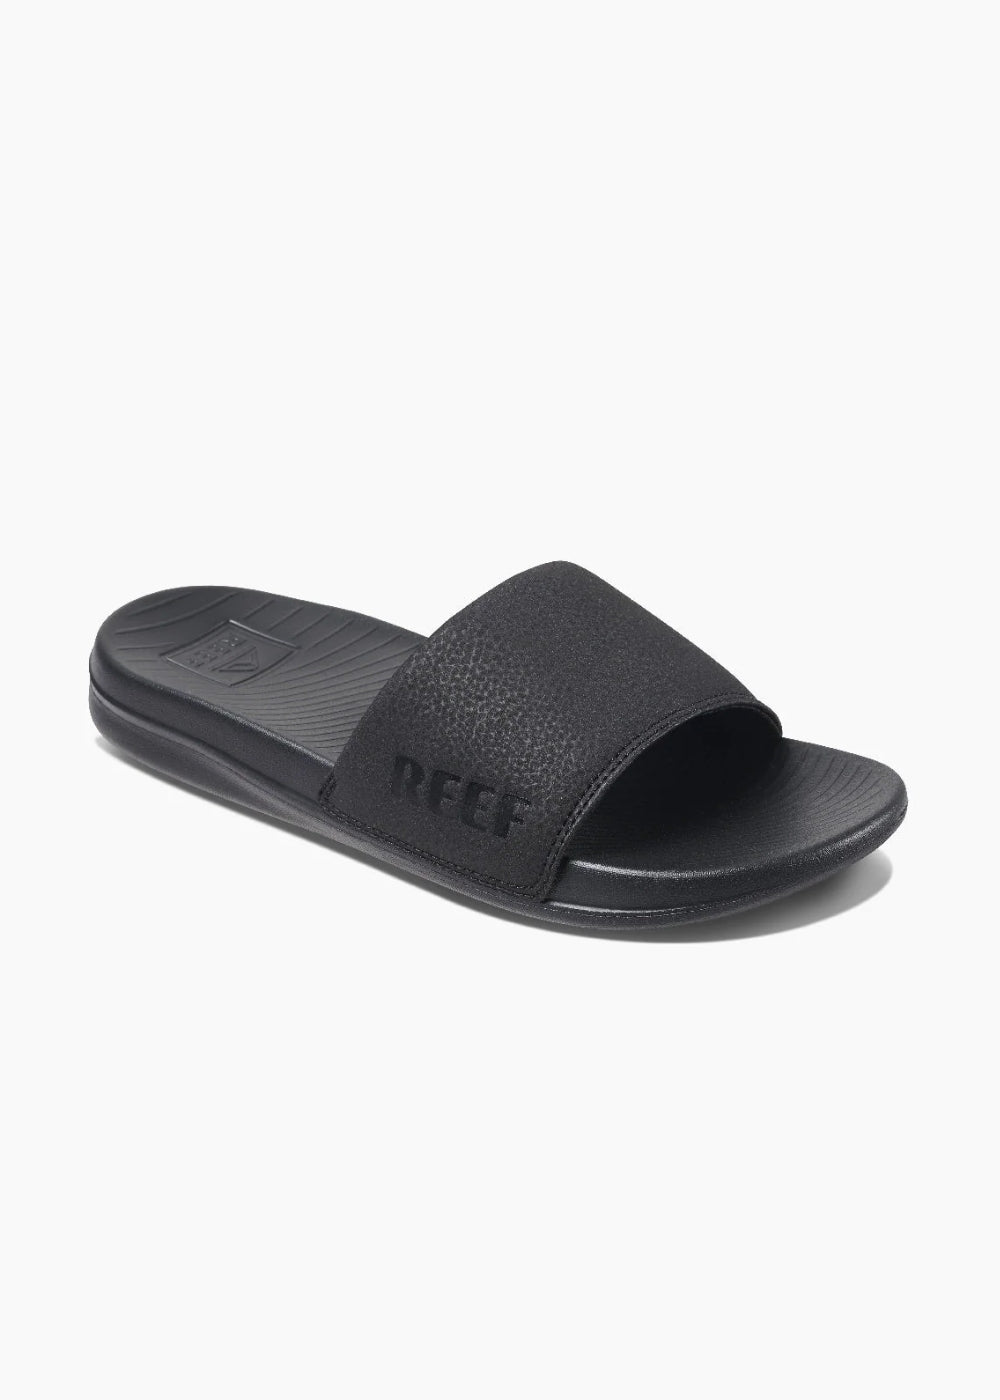 One Slide Sandals by Reef